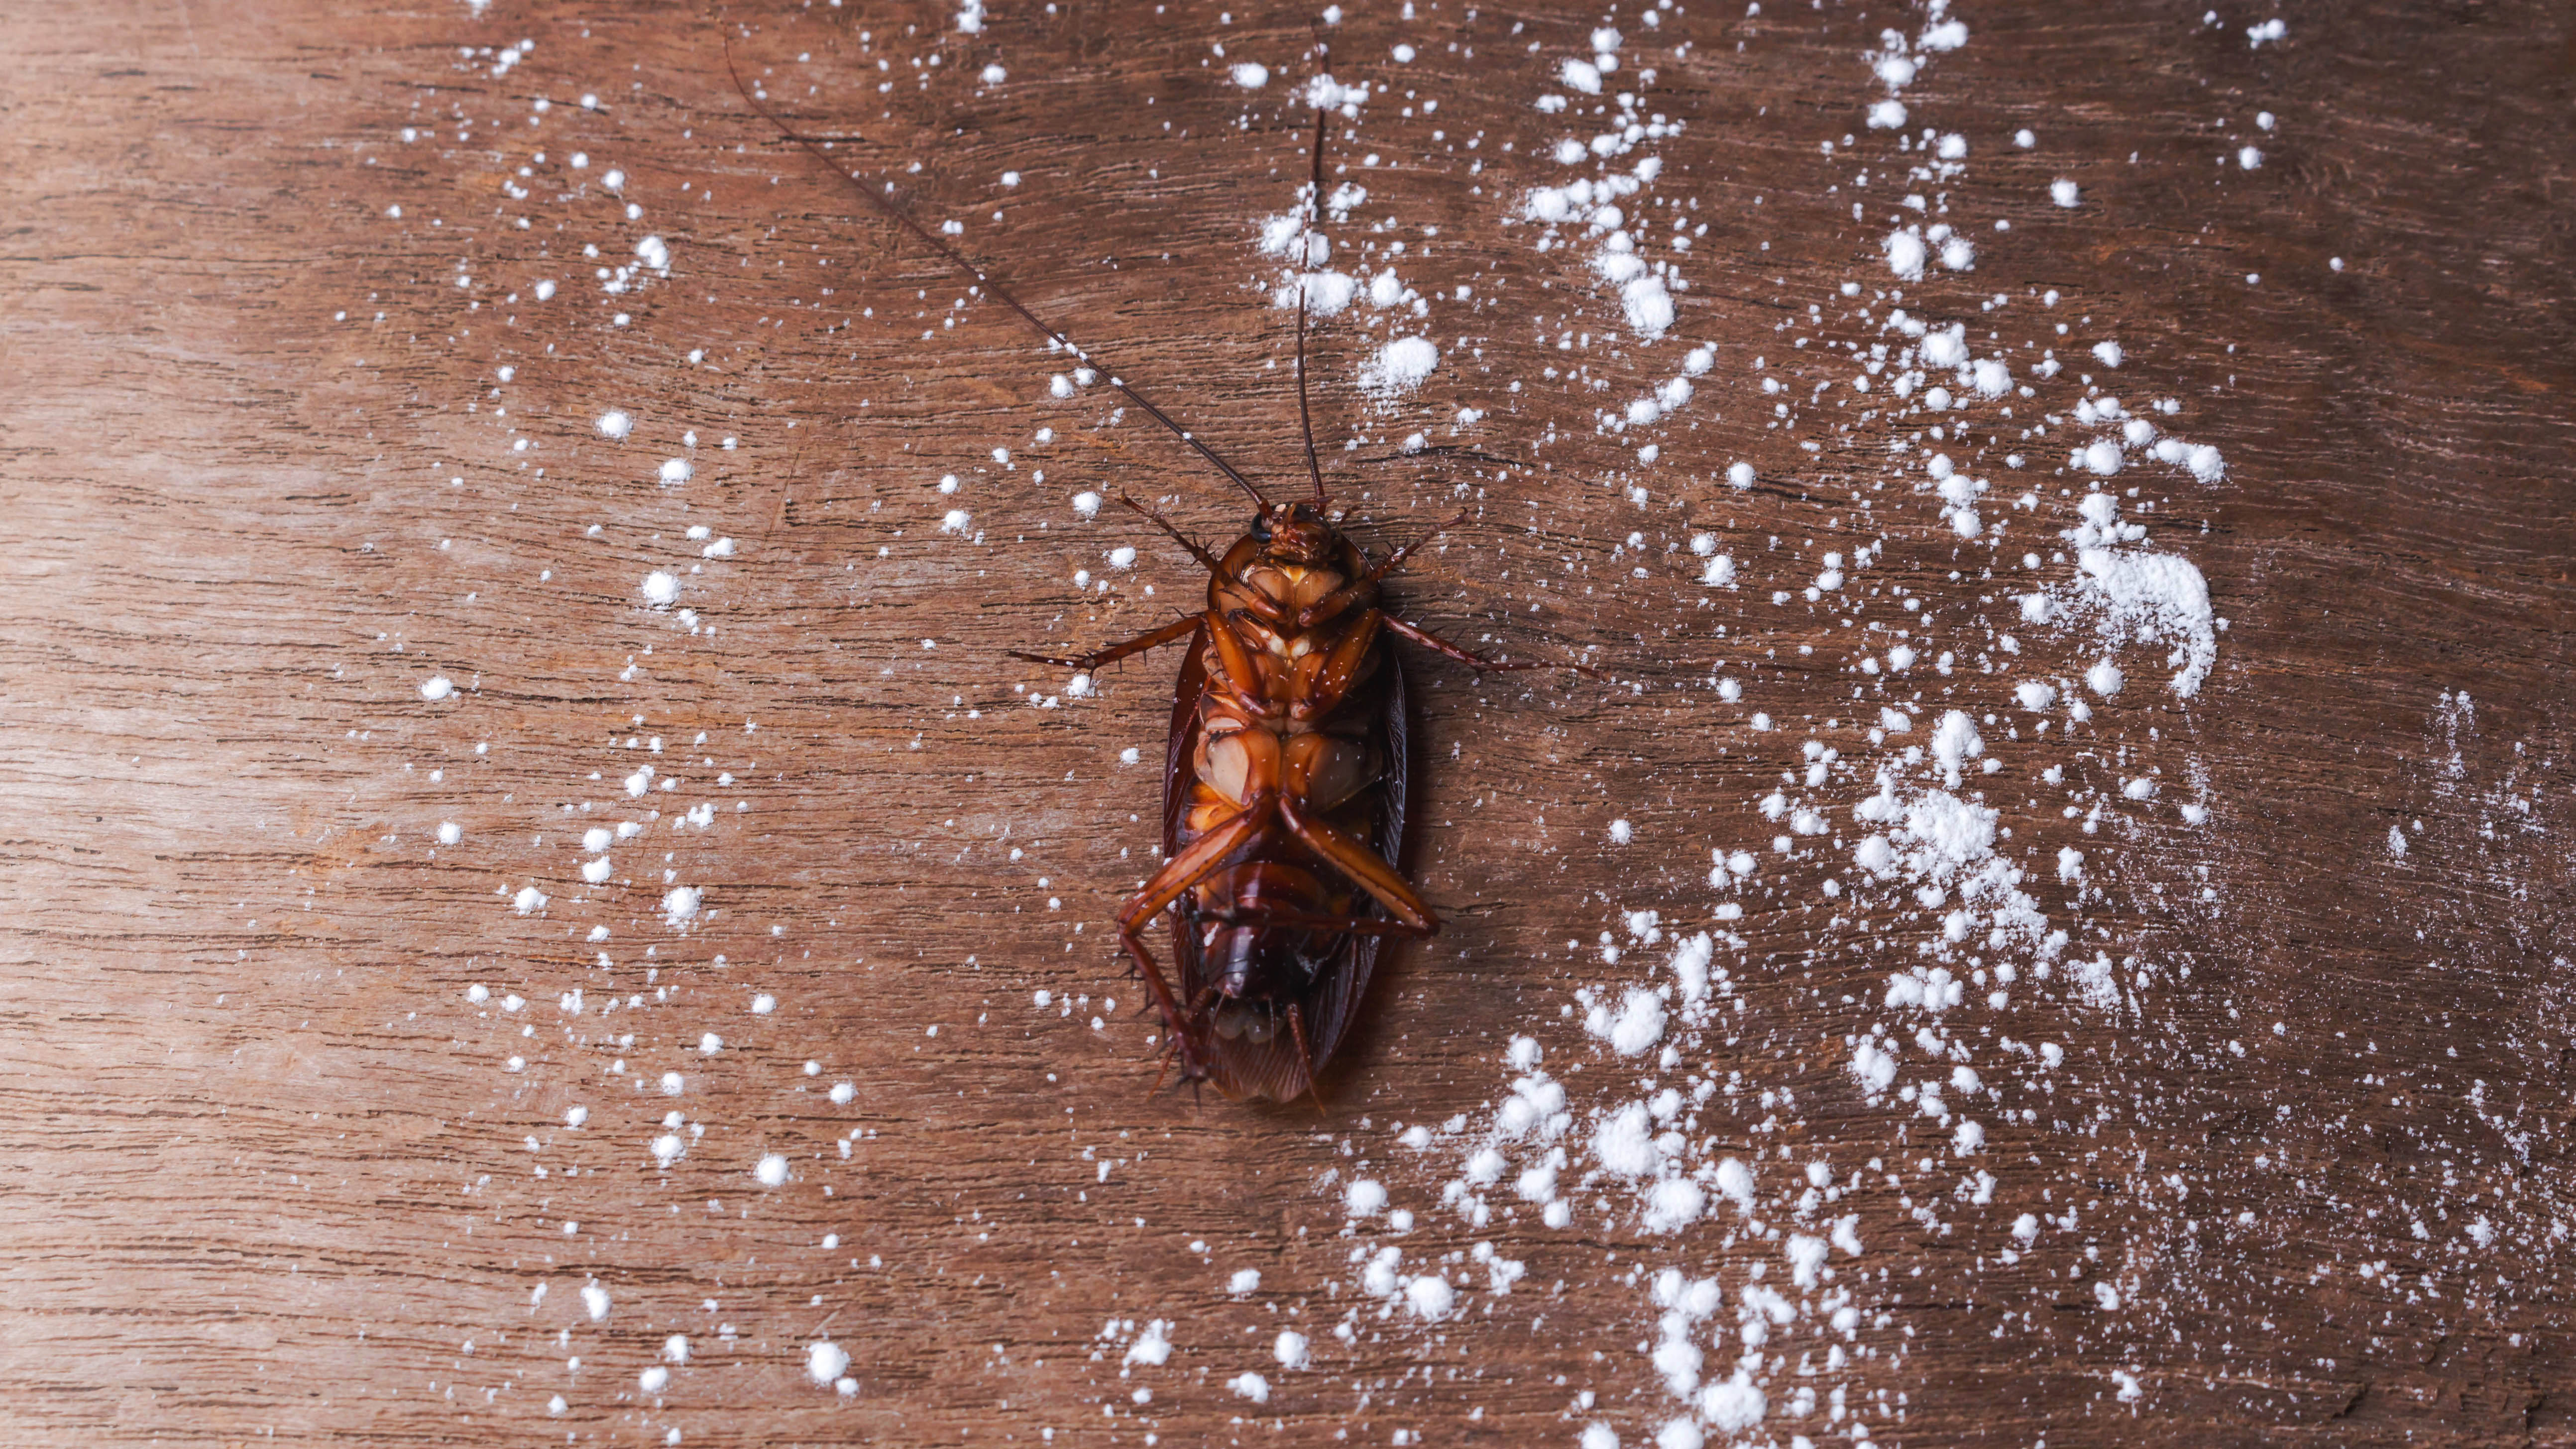 Cockroach killed by insecticide